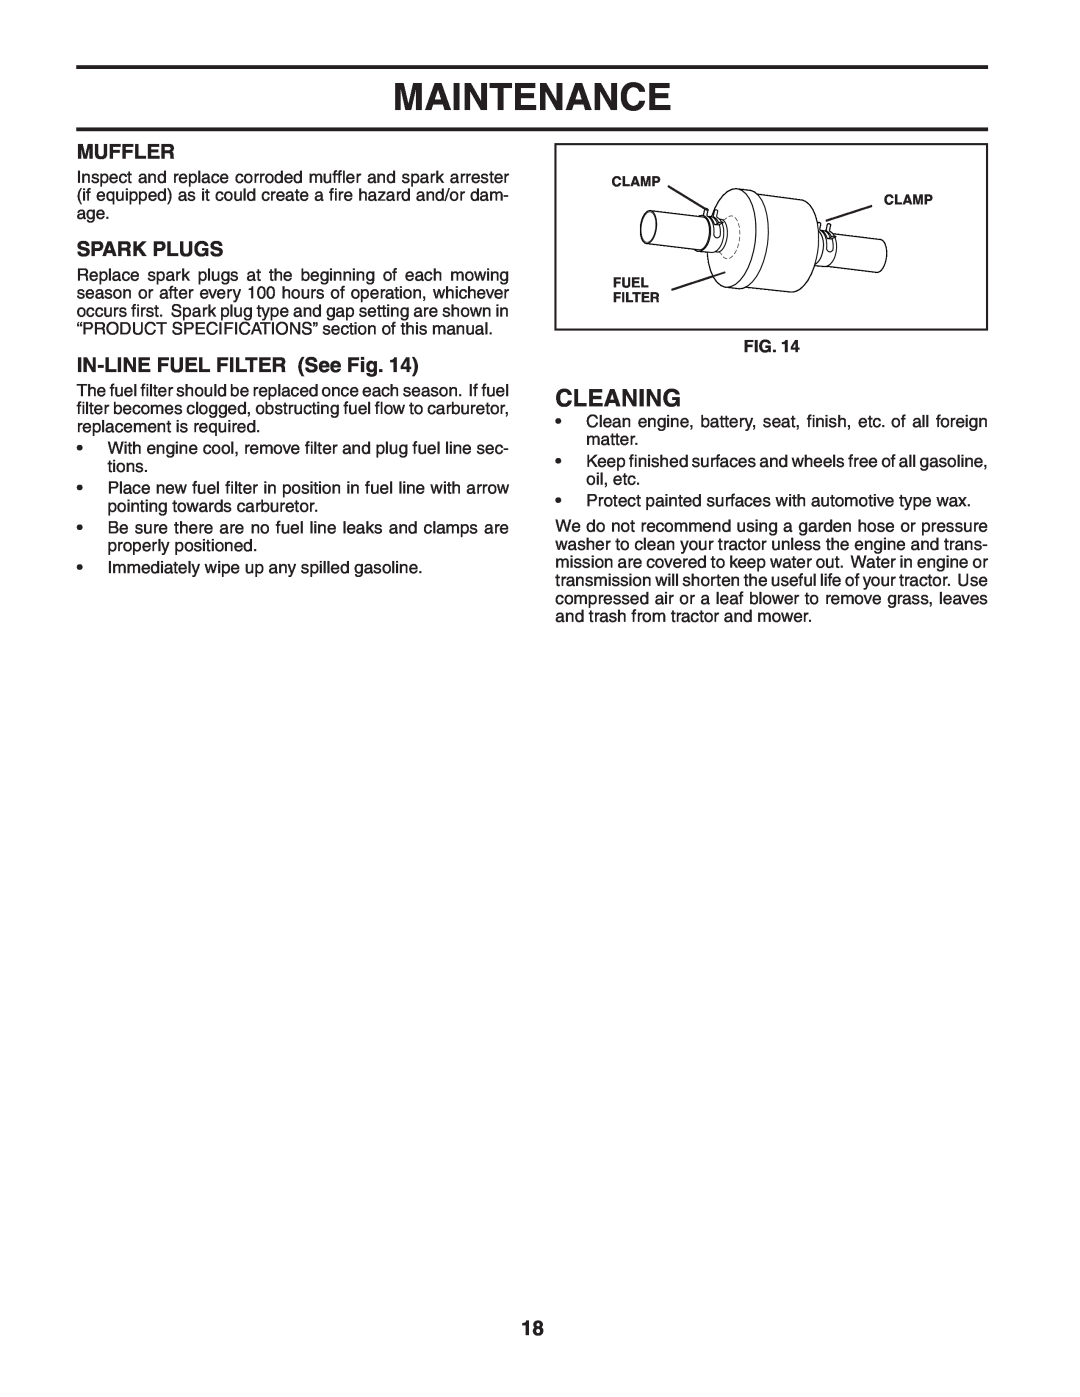 Poulan 183981 manual Cleaning, Muffler, Spark Plugs, IN-LINE FUEL FILTER See Fig, Maintenance 